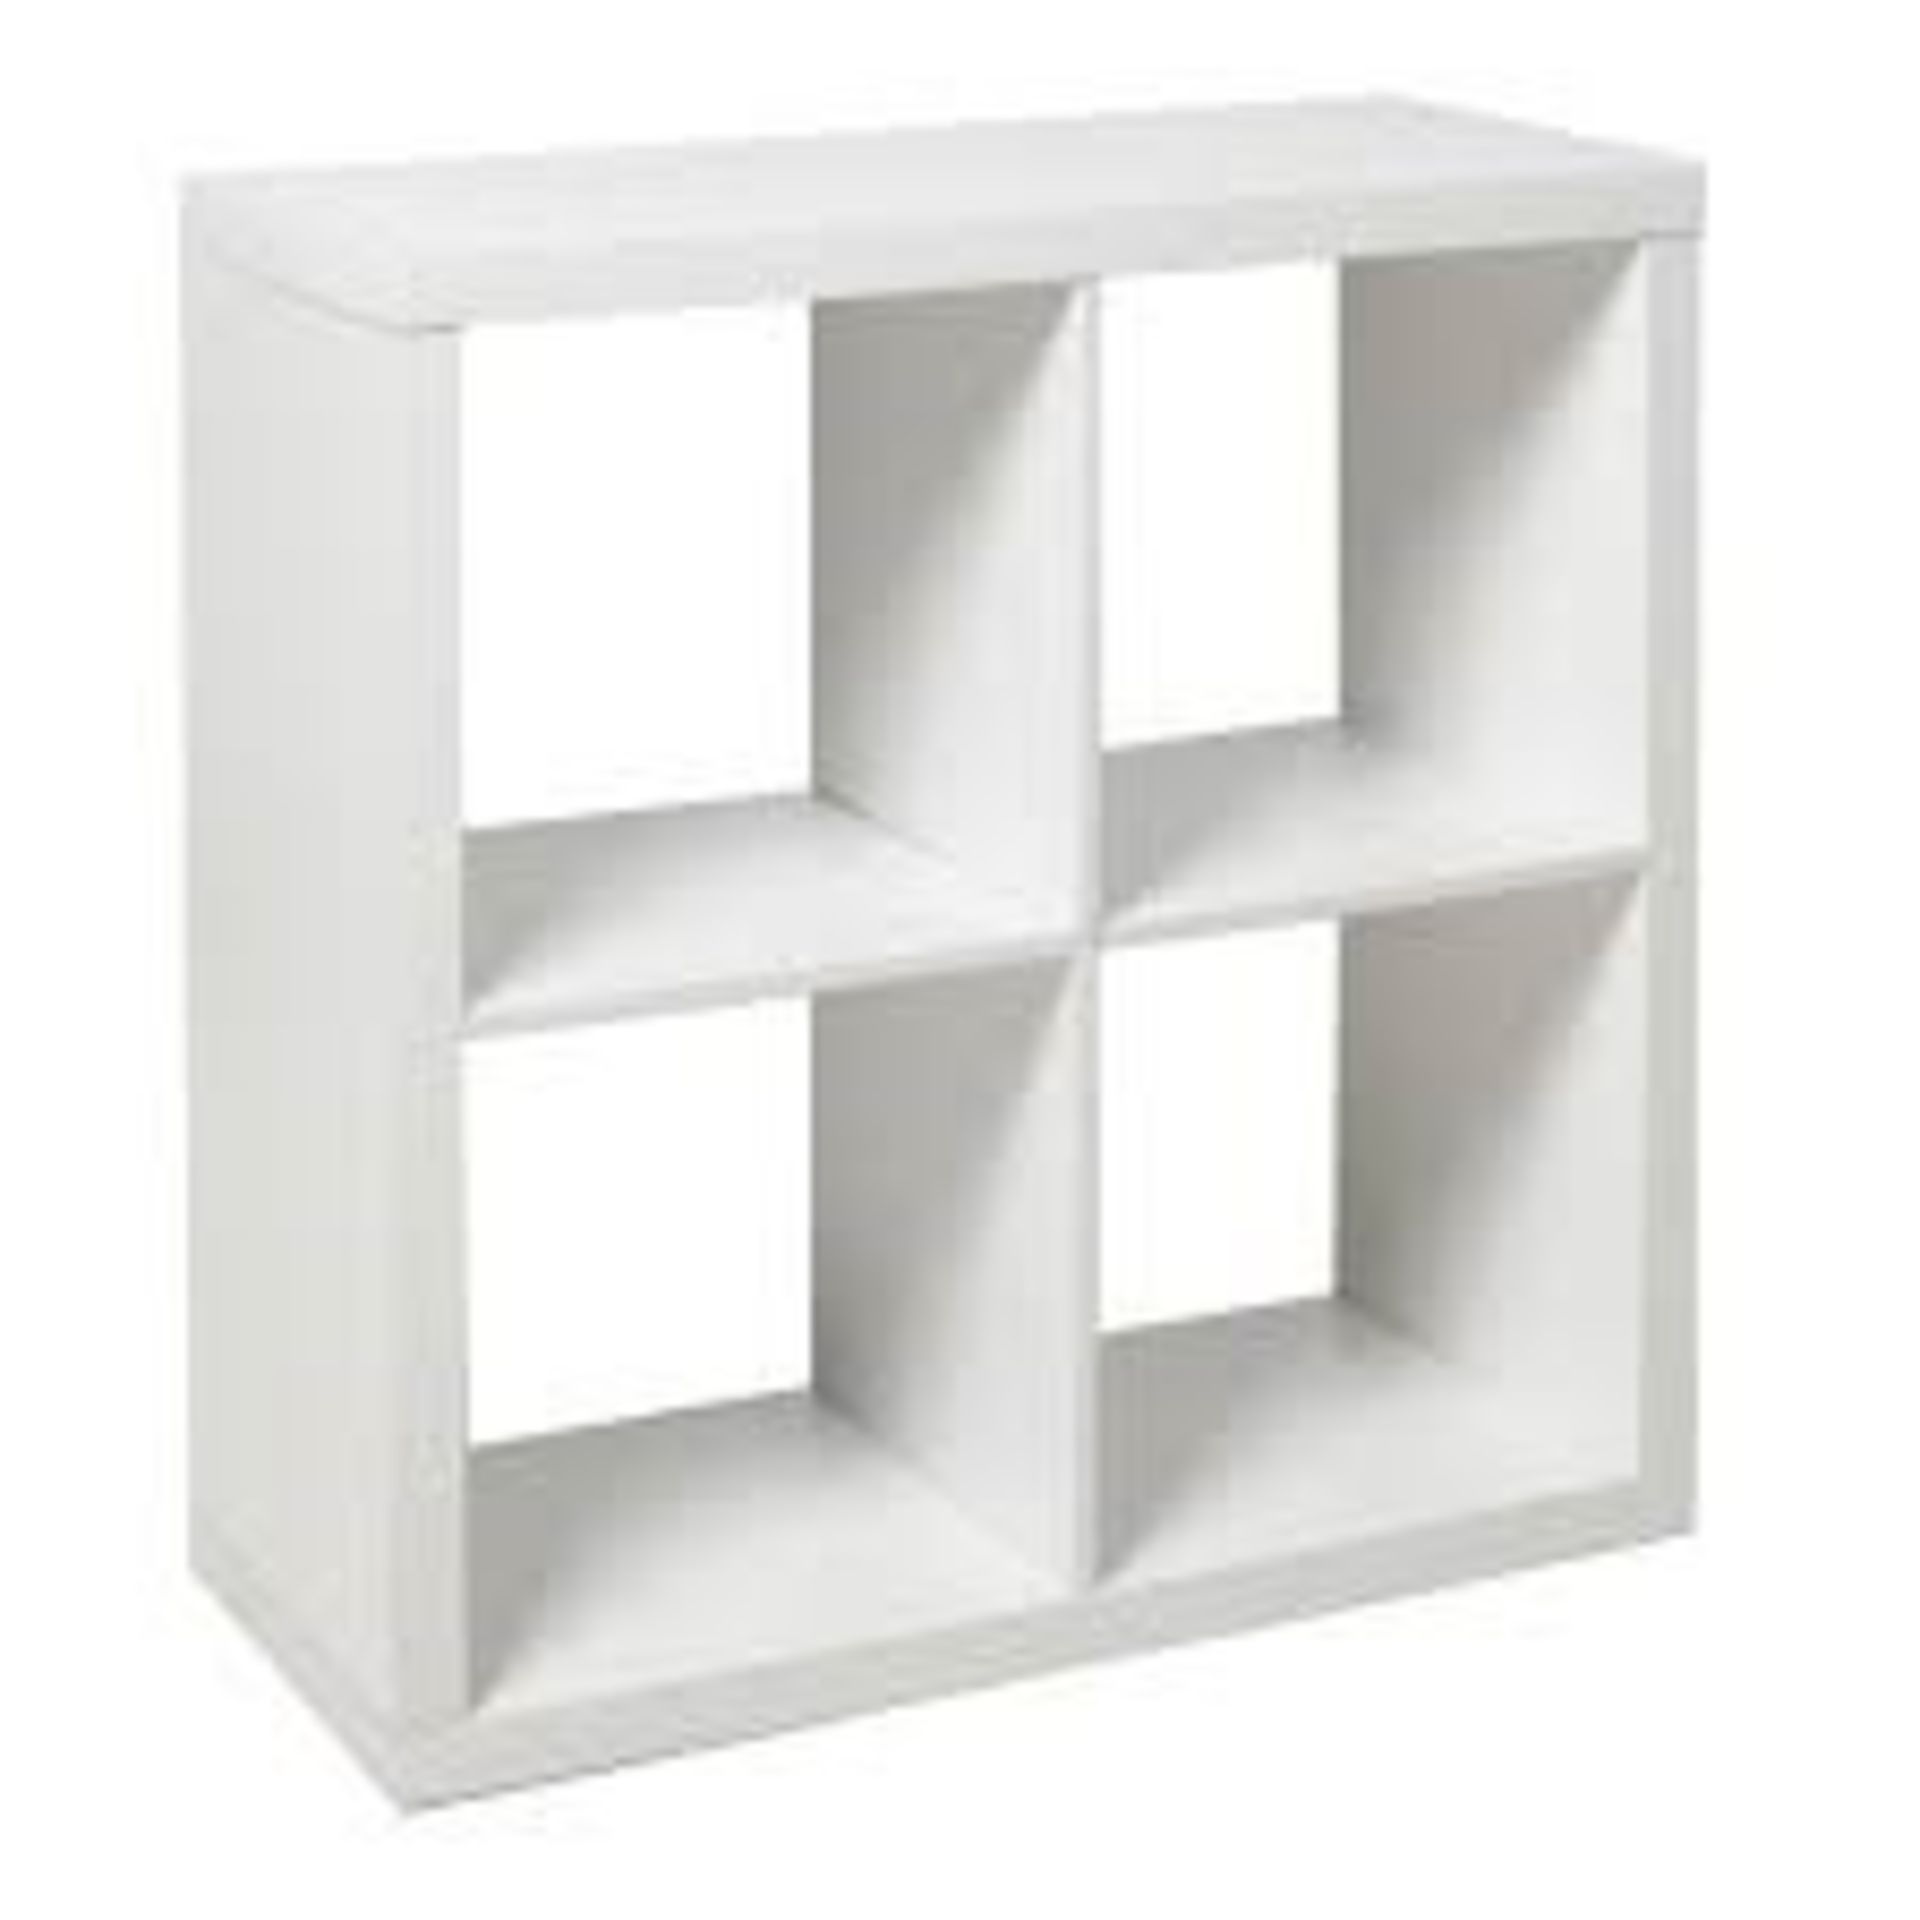 1 GRADE A BOXED WILKO OSLO 4 CUBE UNIT / RRP £30.00 (VIEWING HIGHLY RECOMMENDED)